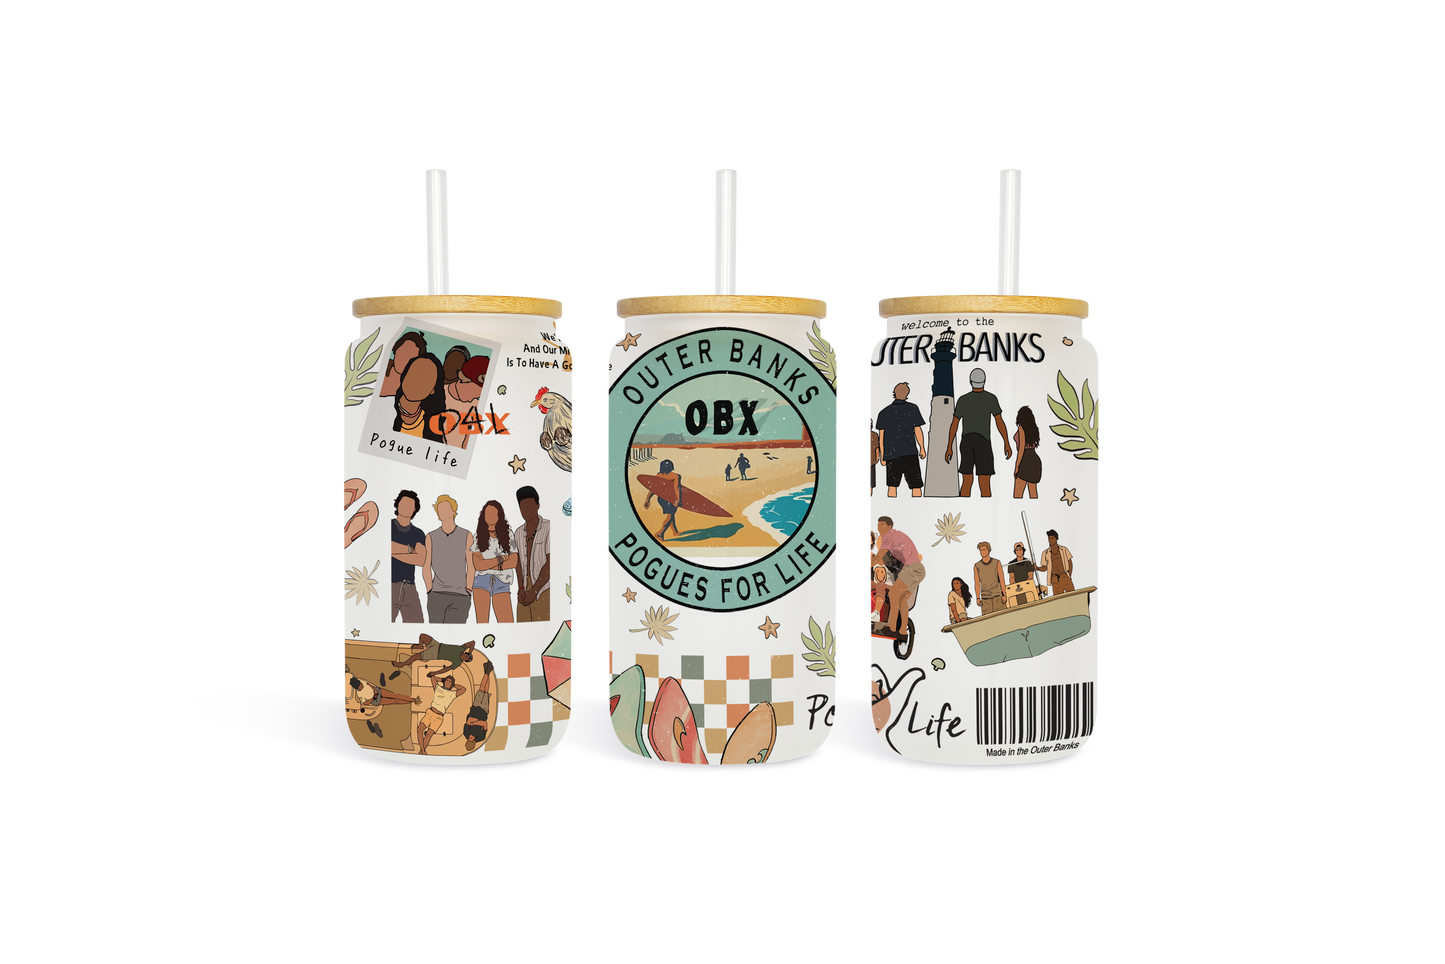 Outer Banks Pogue Life Tumbler Wrap, 16oz Libbey Can Glass, Paradise On Earth Tumbler, Outer Banks Skinny Tumbler, Beach Can Glass Wrap - VartDigitals